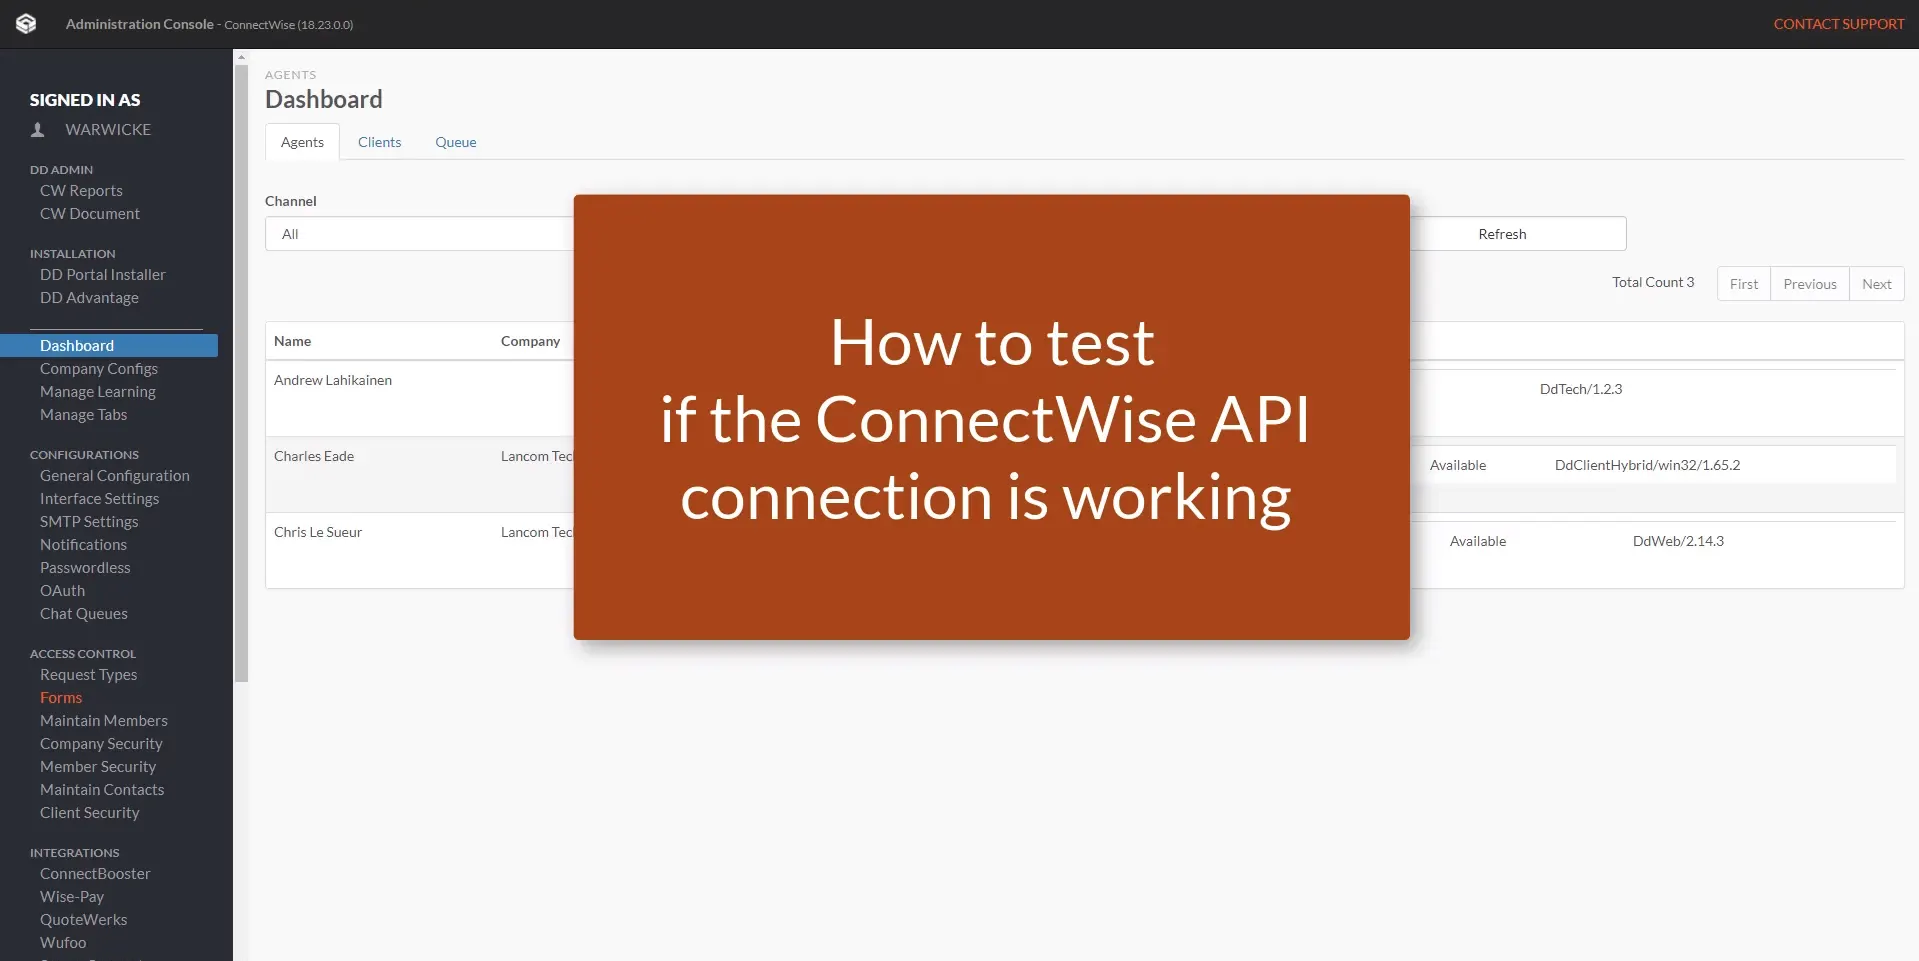 How to test if the ConnectWise API connection is working?